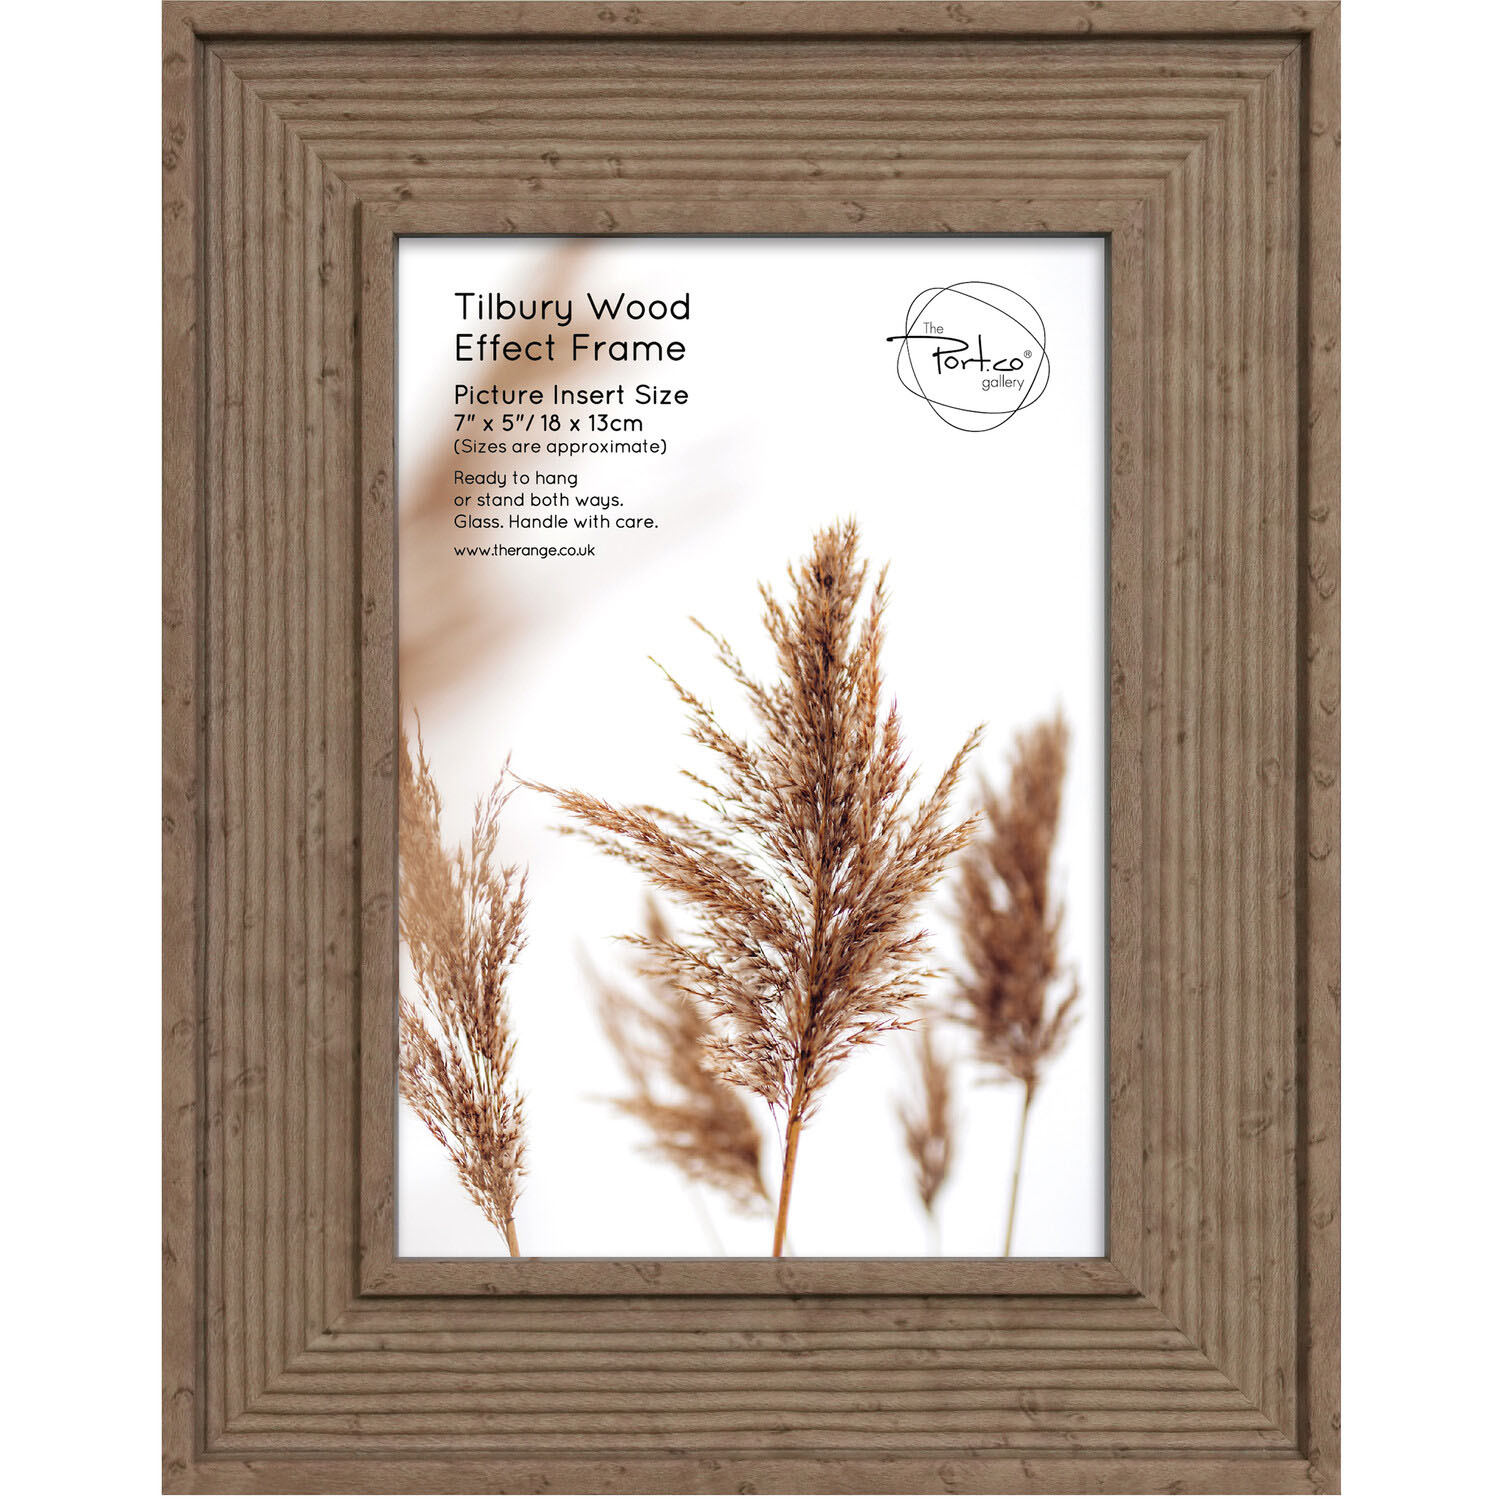 The Port. Co Gallery Tilbury Wood Effect Photo Frame 7 x 5 inch Image 1